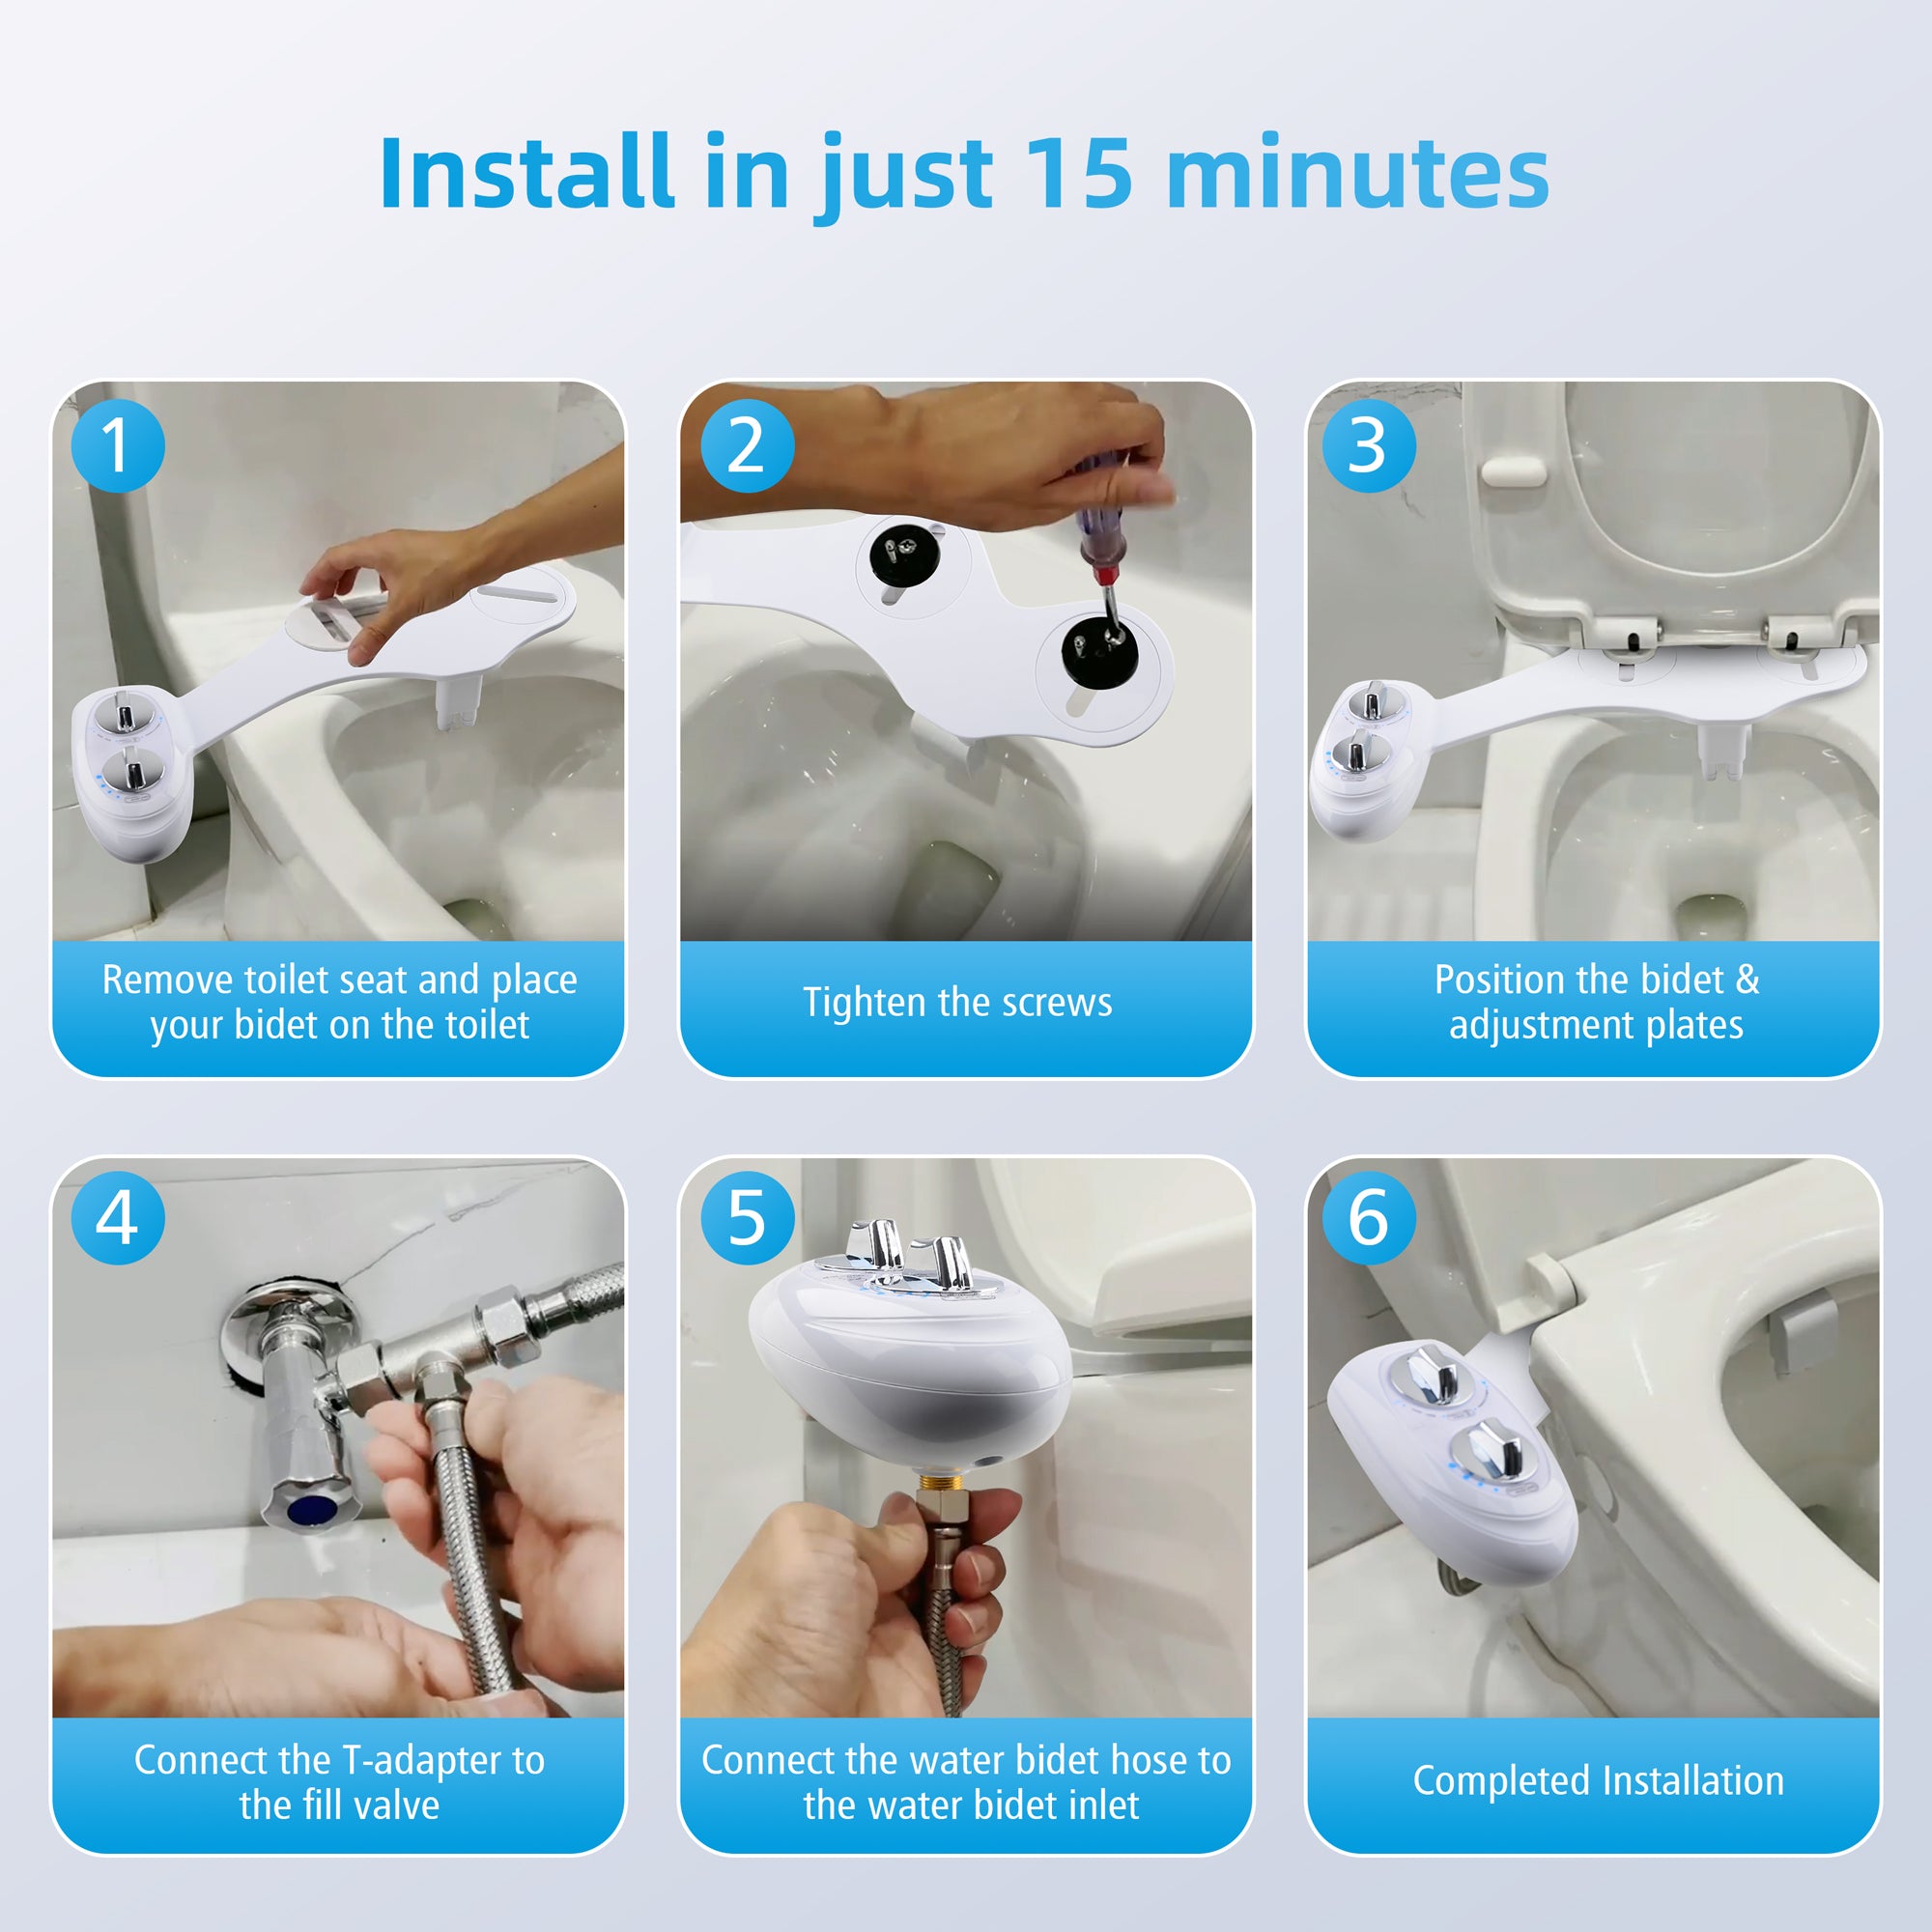 Bidet Toilet Attachment, Non-electric Self Cleaning Sprayer with Dual Nozzles -- BD-2205